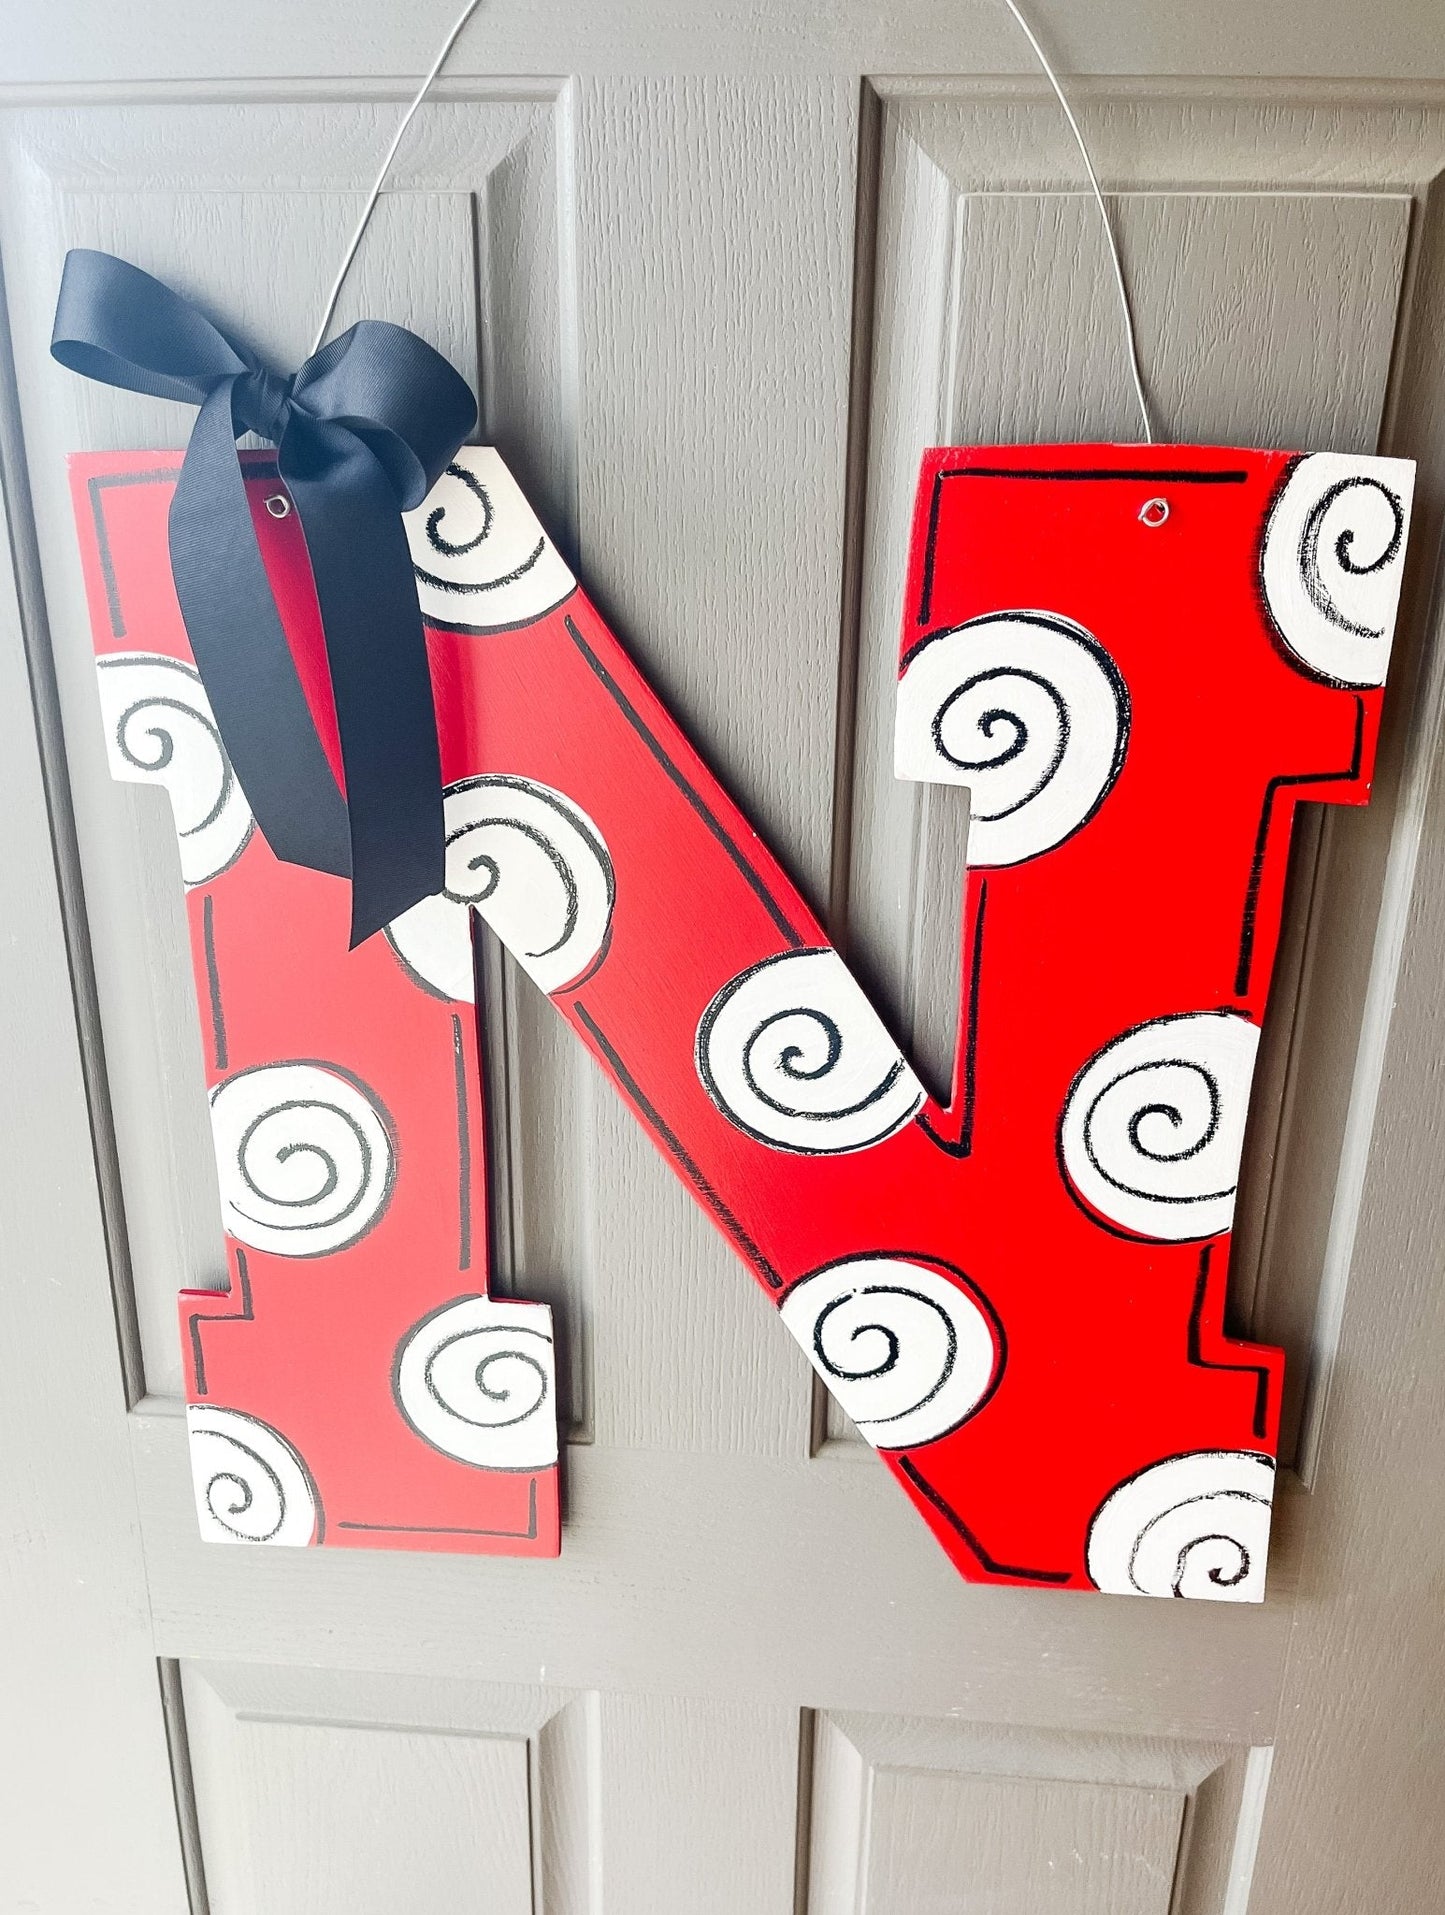 Huskers "N" Red and White Swirl - Self Checkout at Creative Collab Collection - Miss Molly Designs, LLC